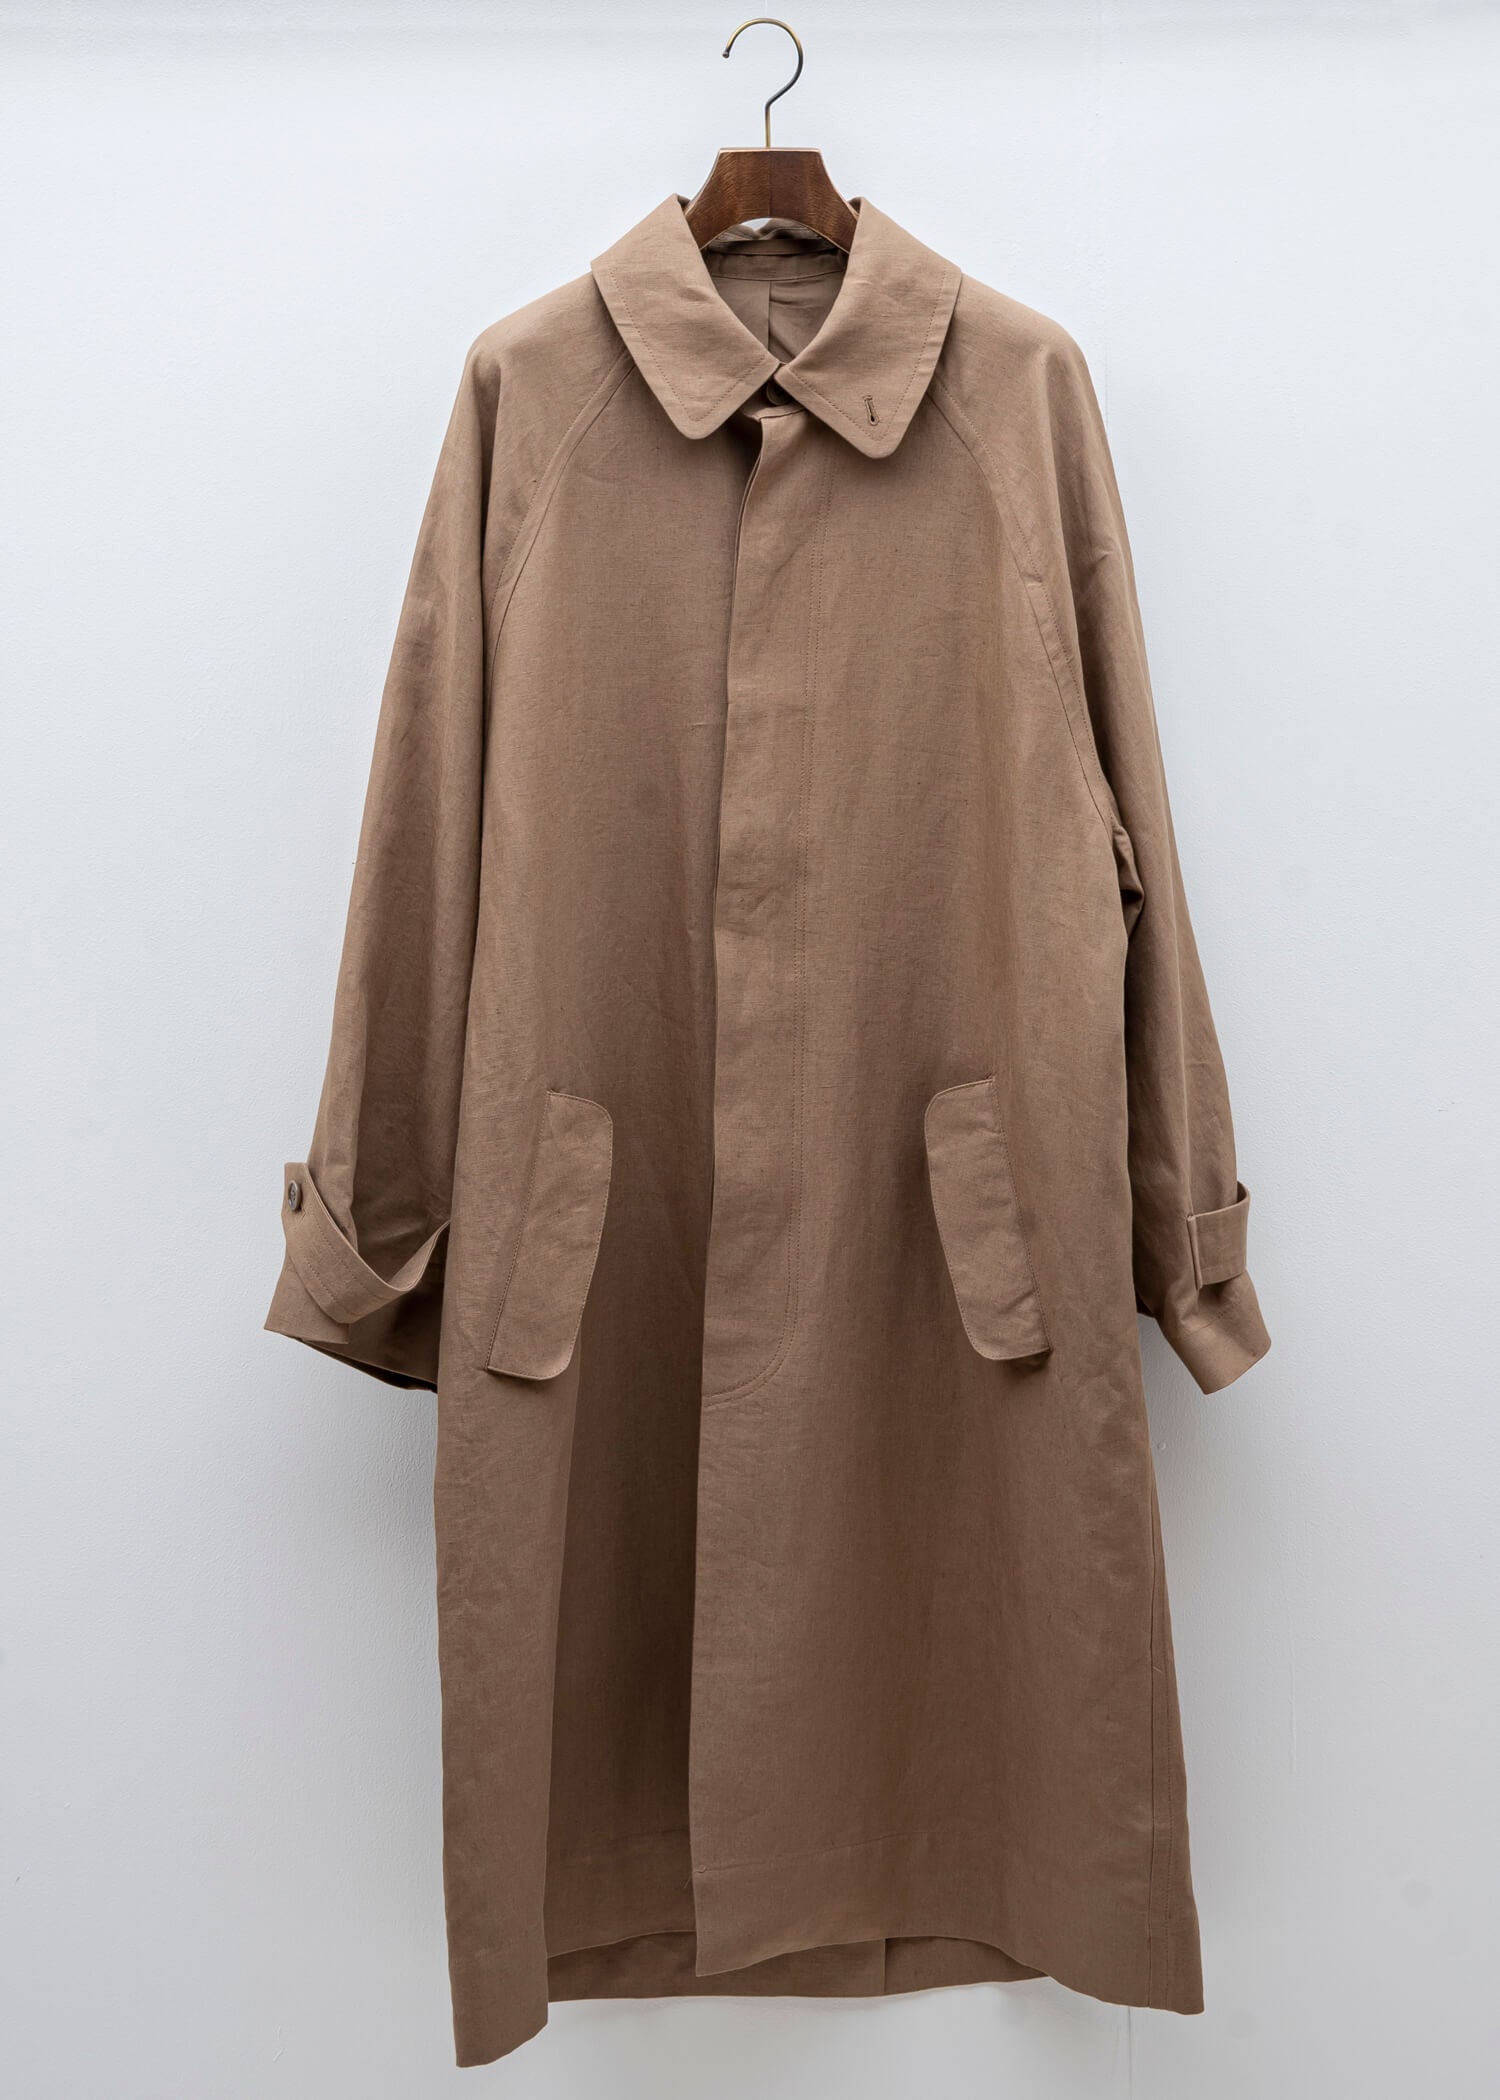 HED MAYNER / TRENCH COAT / CINNAMON LINEN